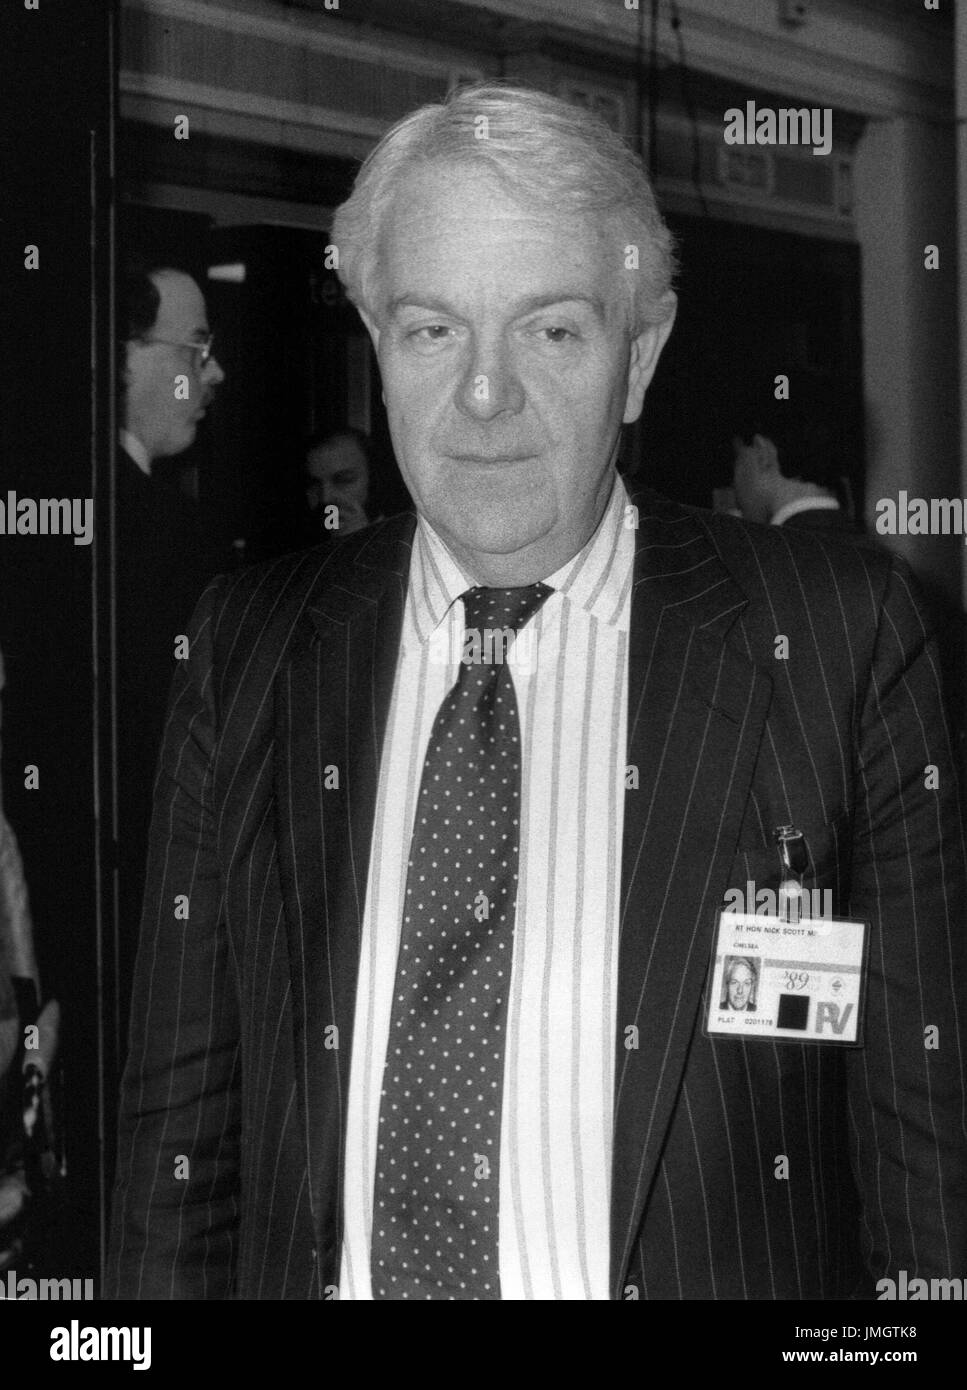 Rt. Hon. Nicholas Scott, Conservative party Member of Parliament for Chelsea, attends the party conference in Blackpool, England on October 10, 1989. Stock Photo